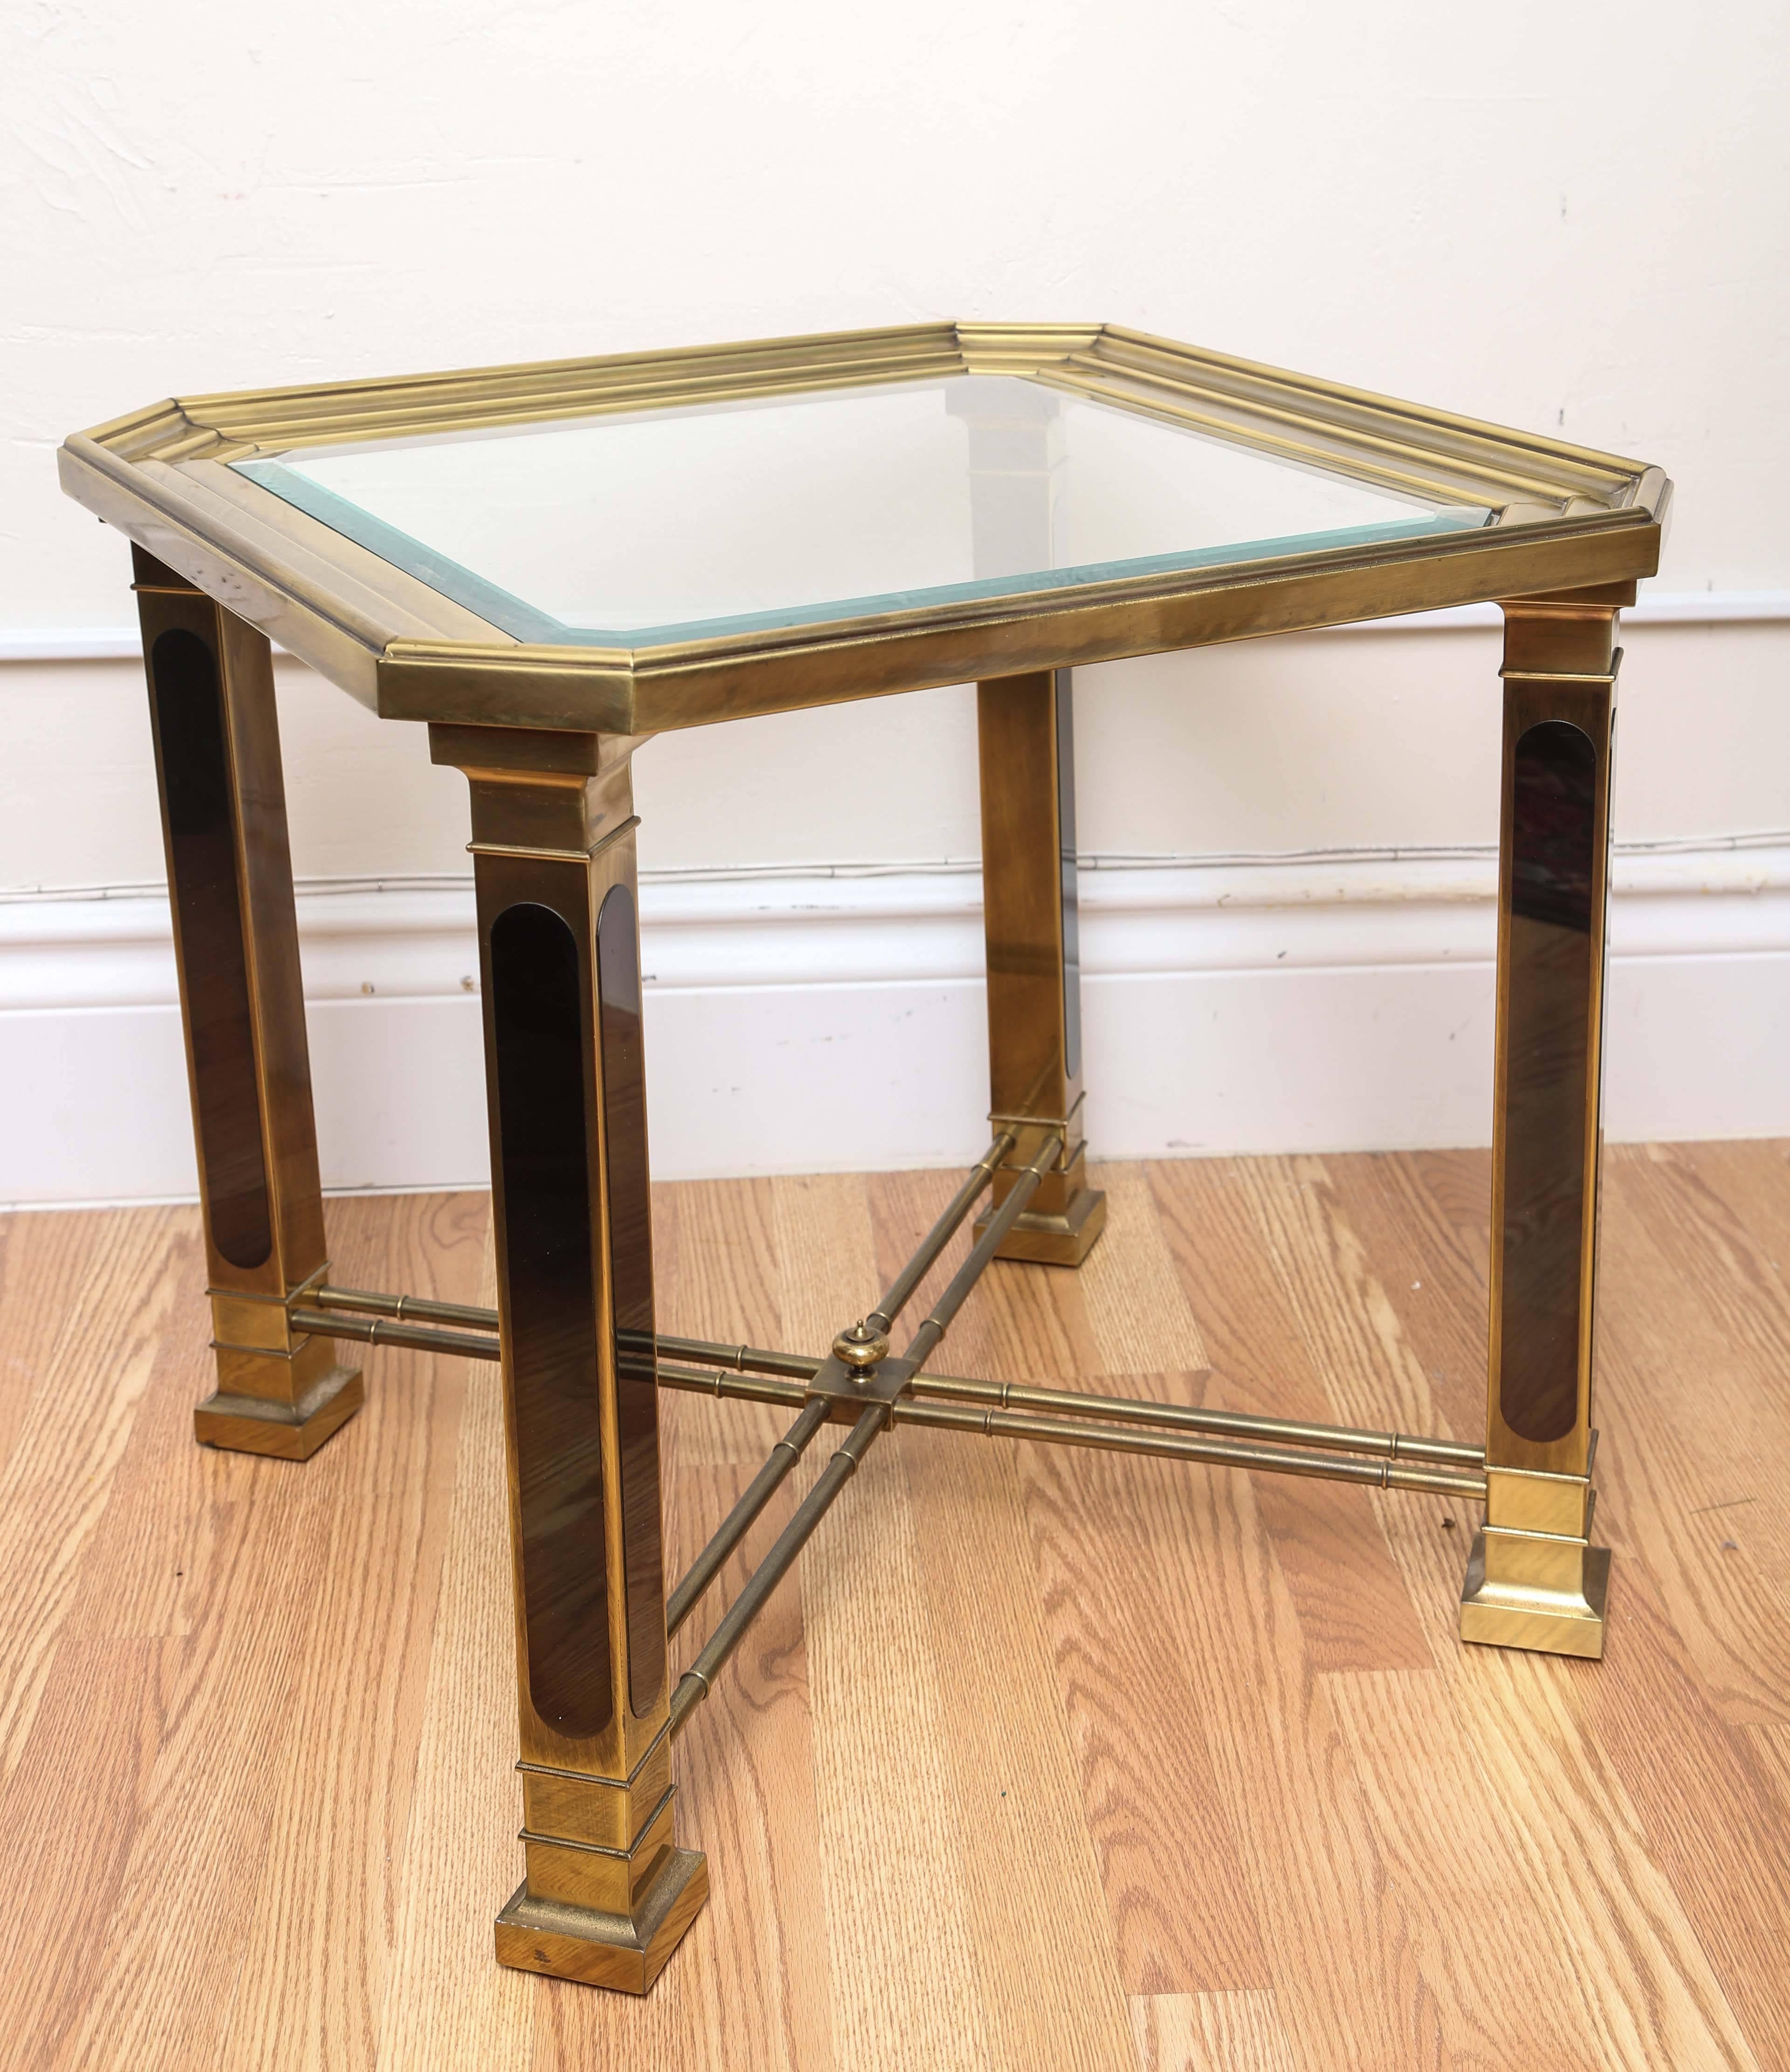 Mid-Century Modern style brass and glass side table by Mastercraft.